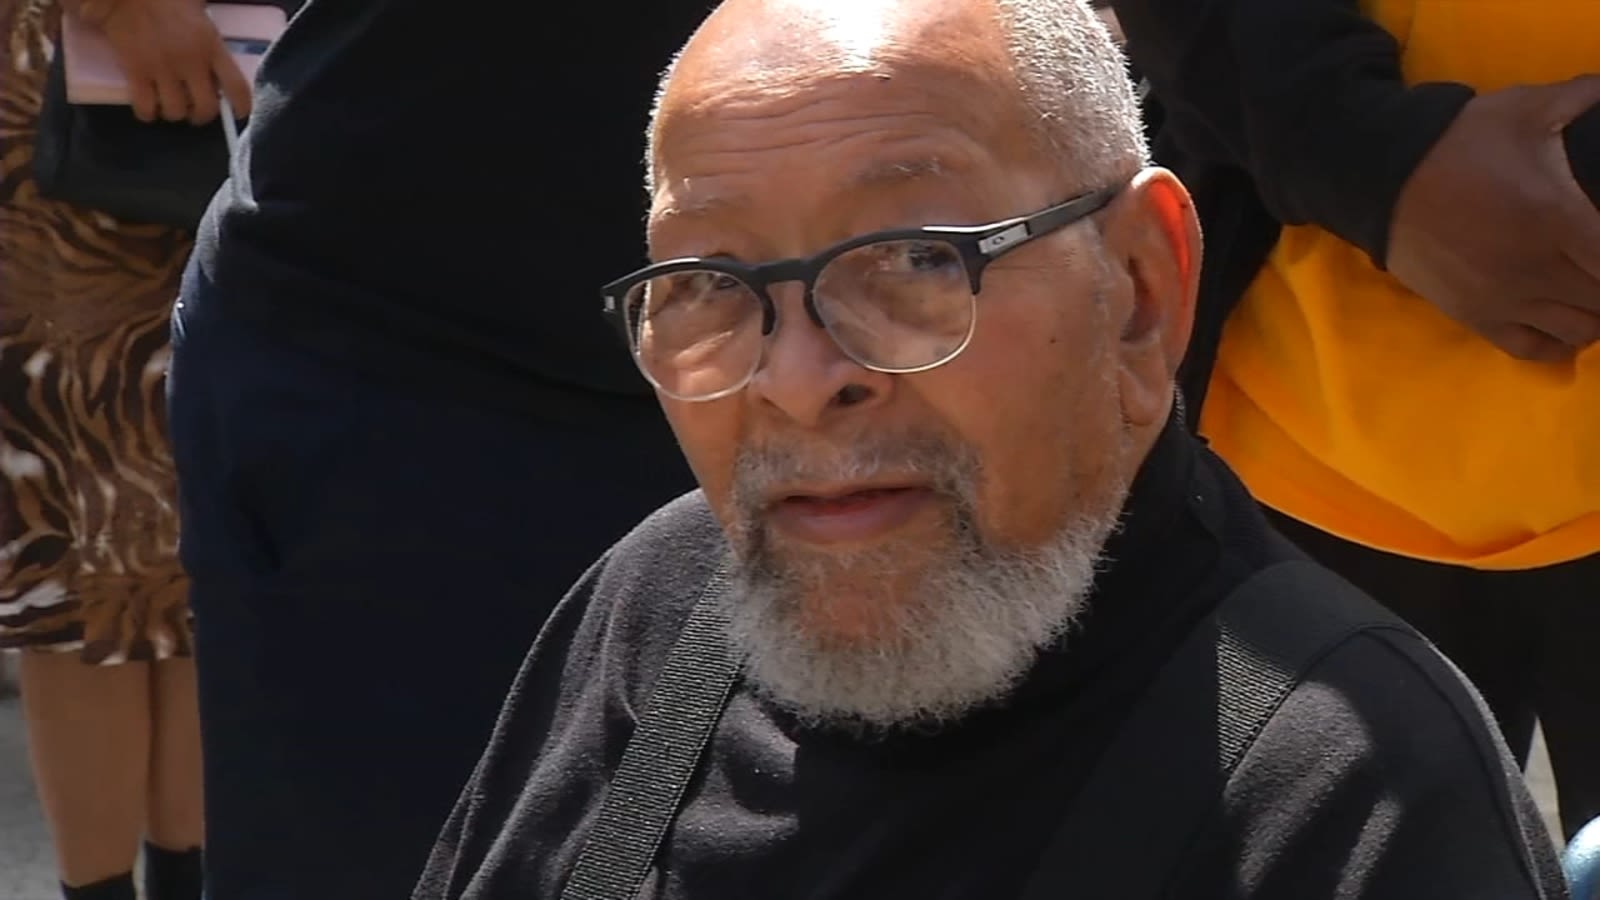 LIVE SOON: SF's GLIDE church to hold memorial for late Rev. Cecil Williams